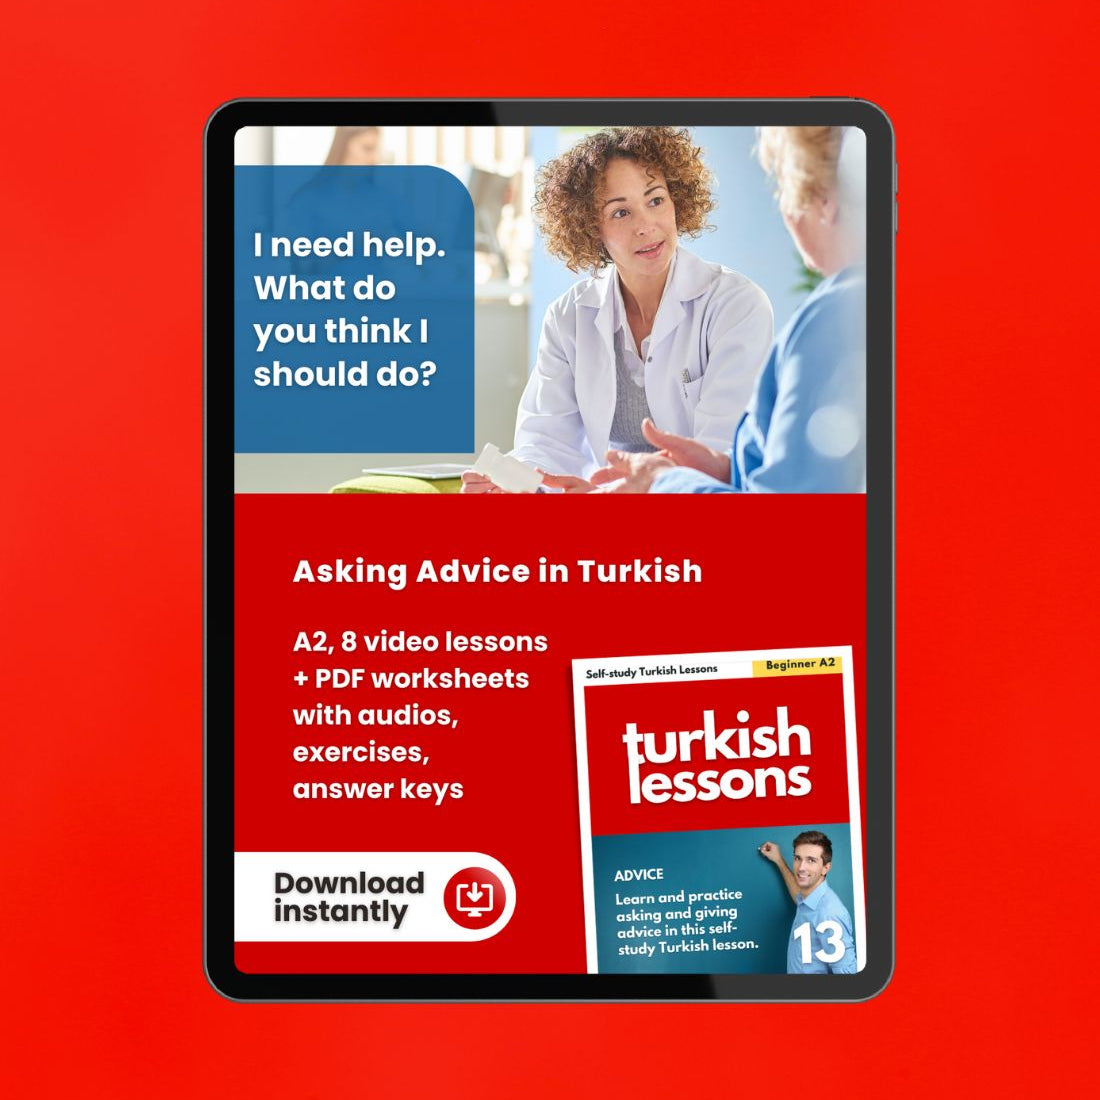 turkish lessons a2 - asking advice in turkish language